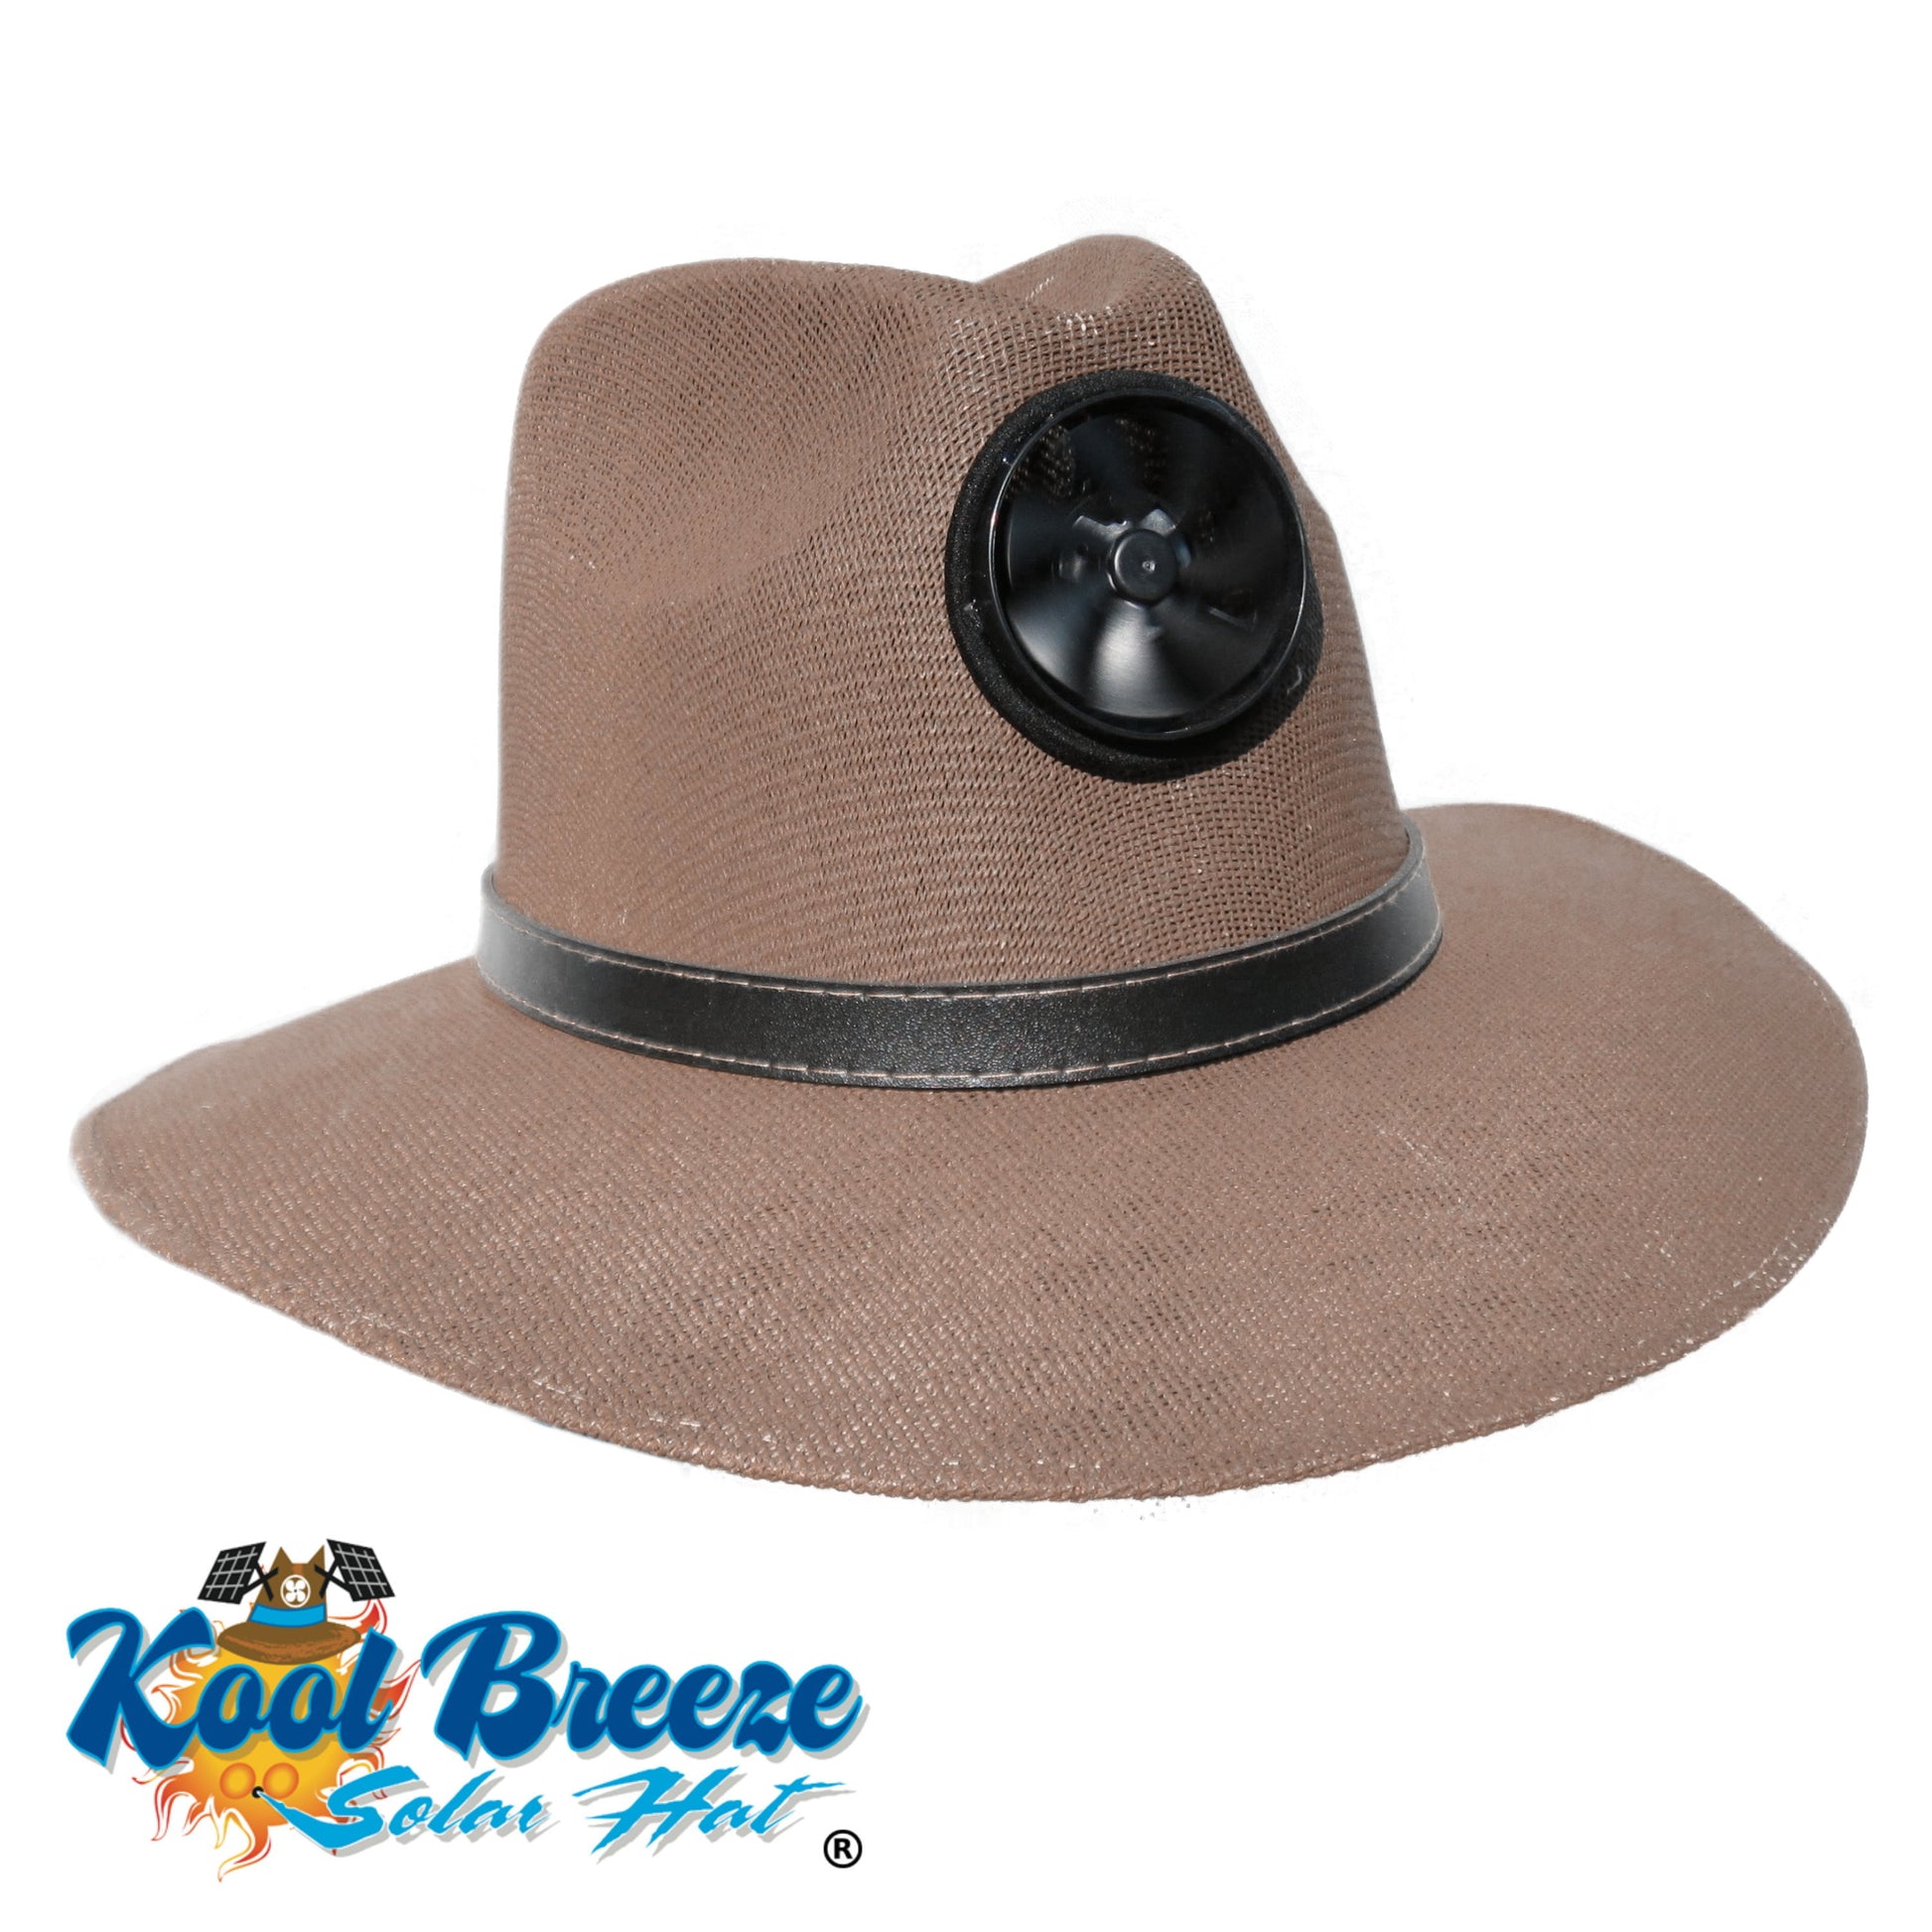 Men's Brown Cabana with Black Band Solar Hat - Sun Hat with Fan, One Size